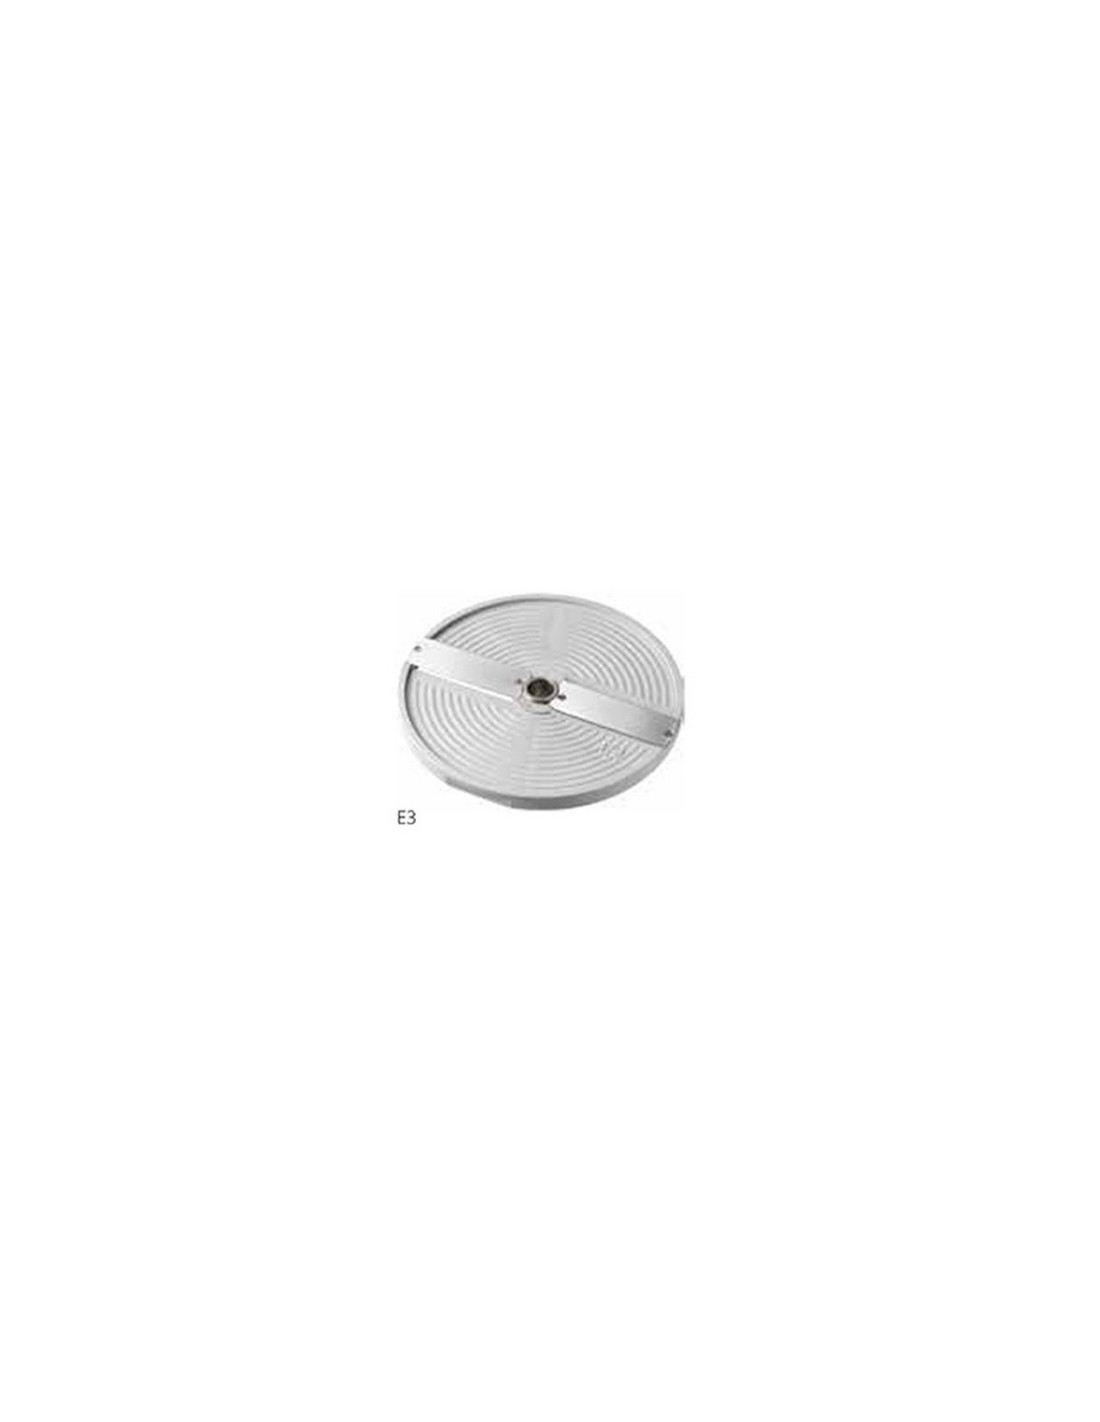 Disc for slicing apples, bananas, potatoes, courgettes, aubergines, fennel, artichokes - thickness 3 mm